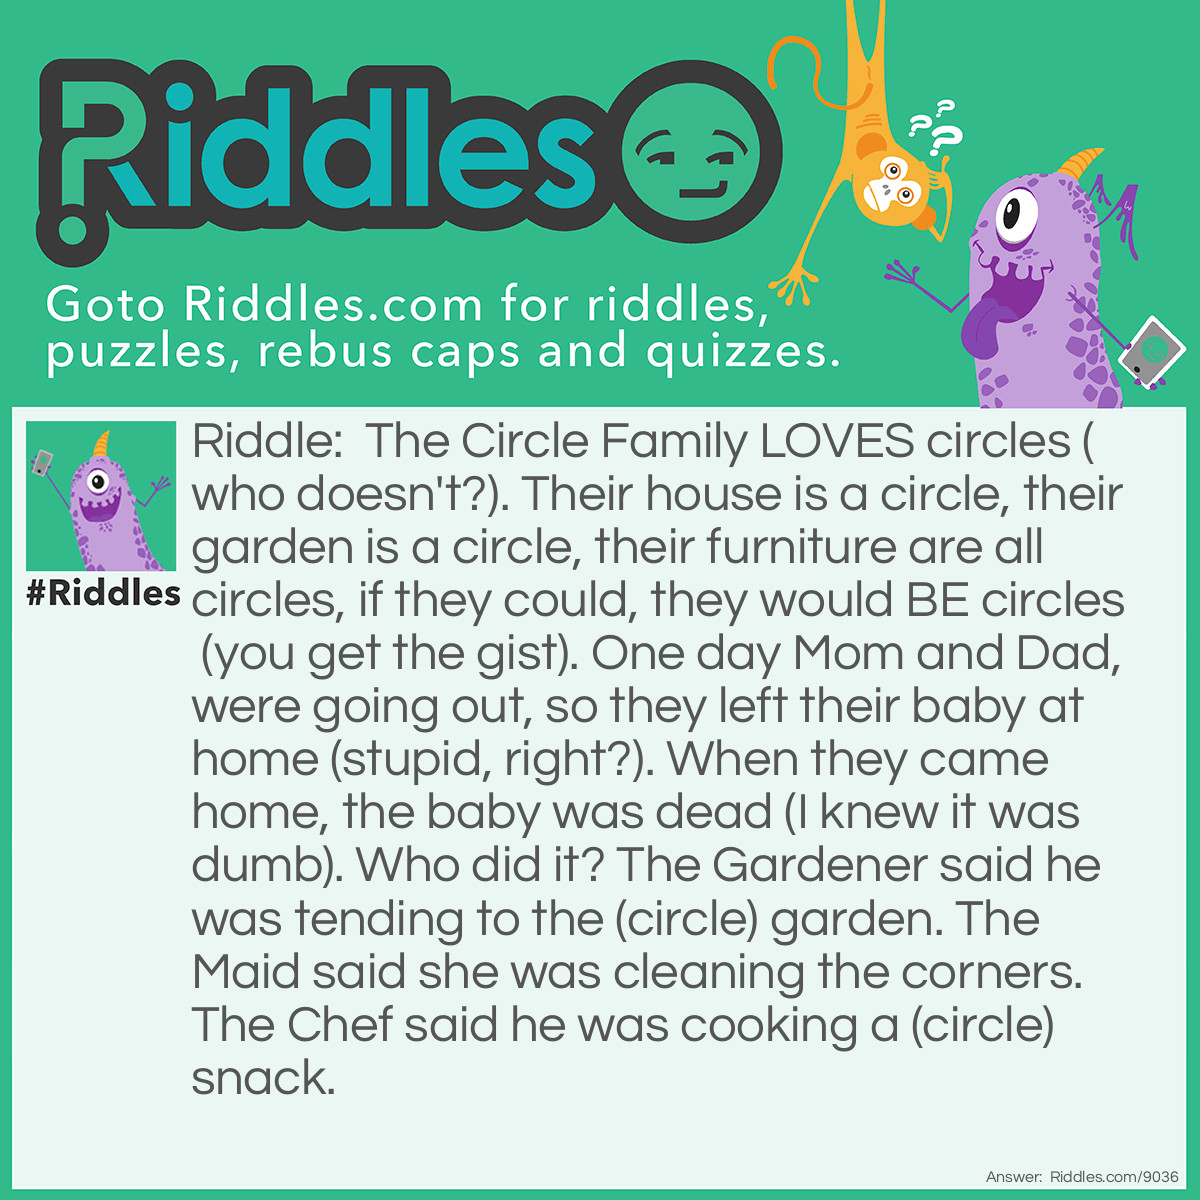 Riddle: The Circle Family LOVES circles (who doesn't?). Their house is a circle, their garden is a circle, their furniture are all circles, if they could, they would BE circles (you get the gist). One day Mom and Dad, were going out, so they left their baby at home (stupid, right?). When they came home, the baby was dead (I knew it was dumb). Who did it? The Gardener said he was tending to the (circle) garden. The Maid said she was cleaning the corners. The Chef said he was cooking a (circle) snack. Answer: The Maid. There ARE no corners...